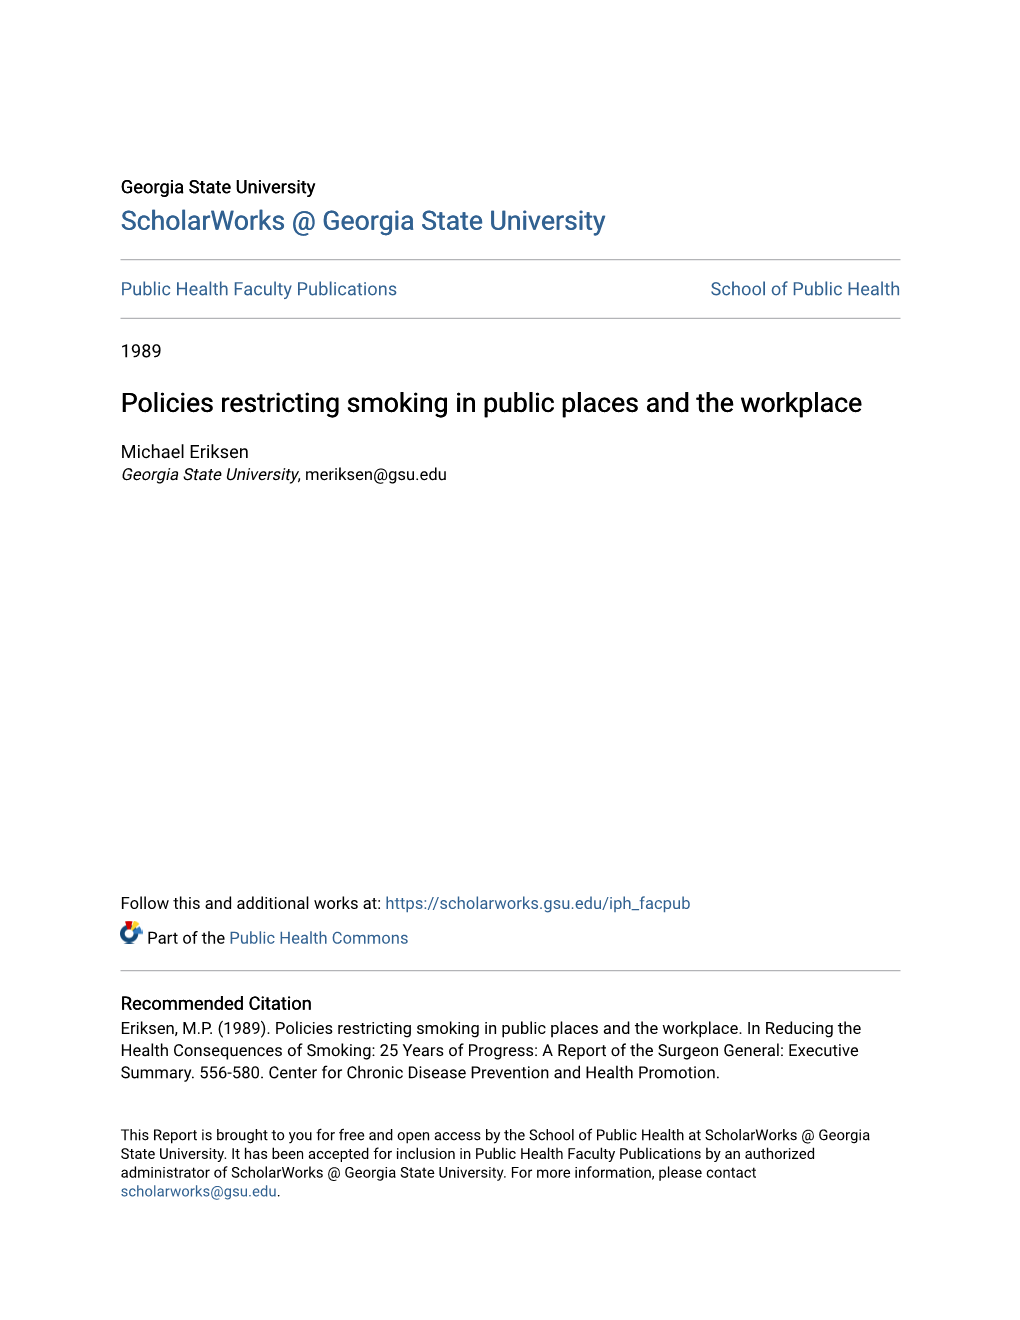 Policies Restricting Smoking in Public Places and the Workplace